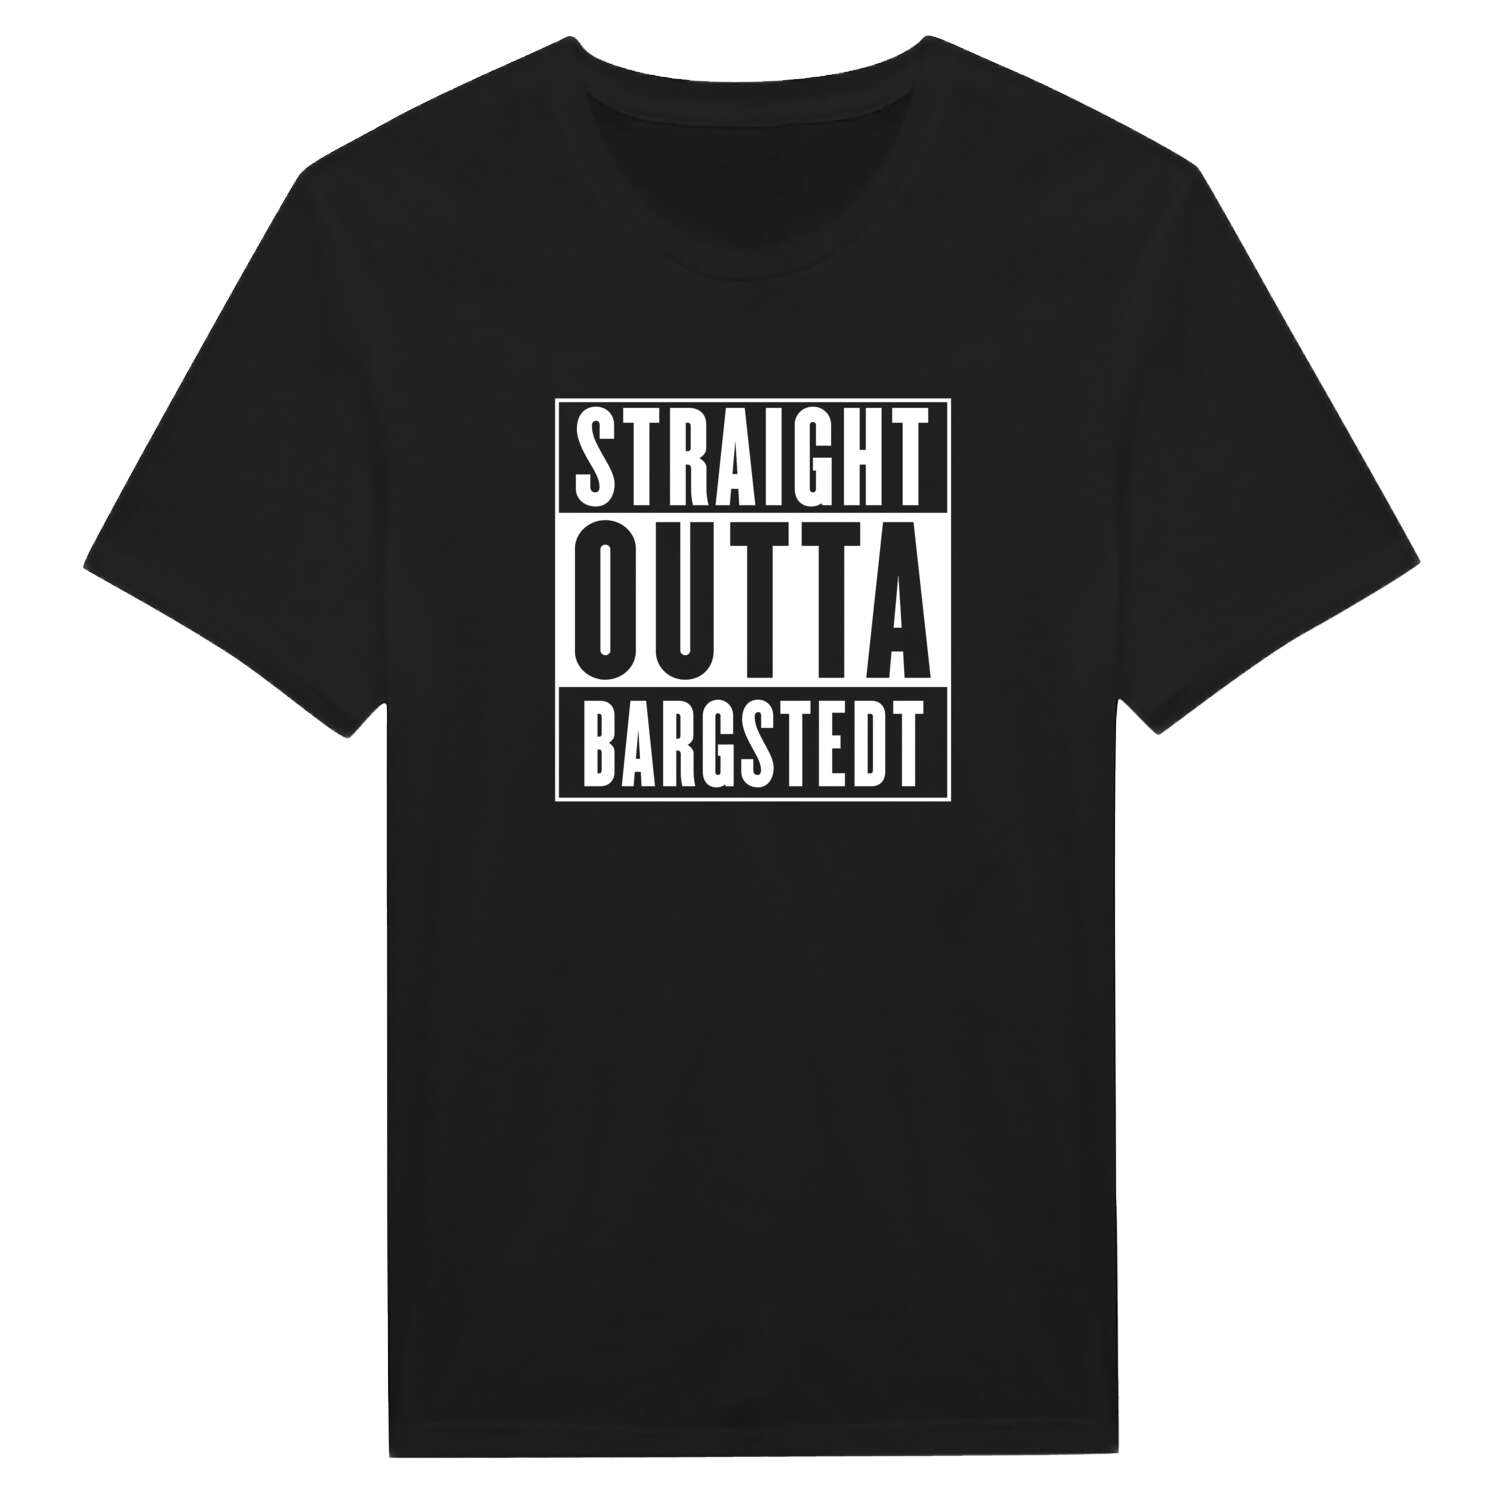 Bargstedt T-Shirt »Straight Outta«